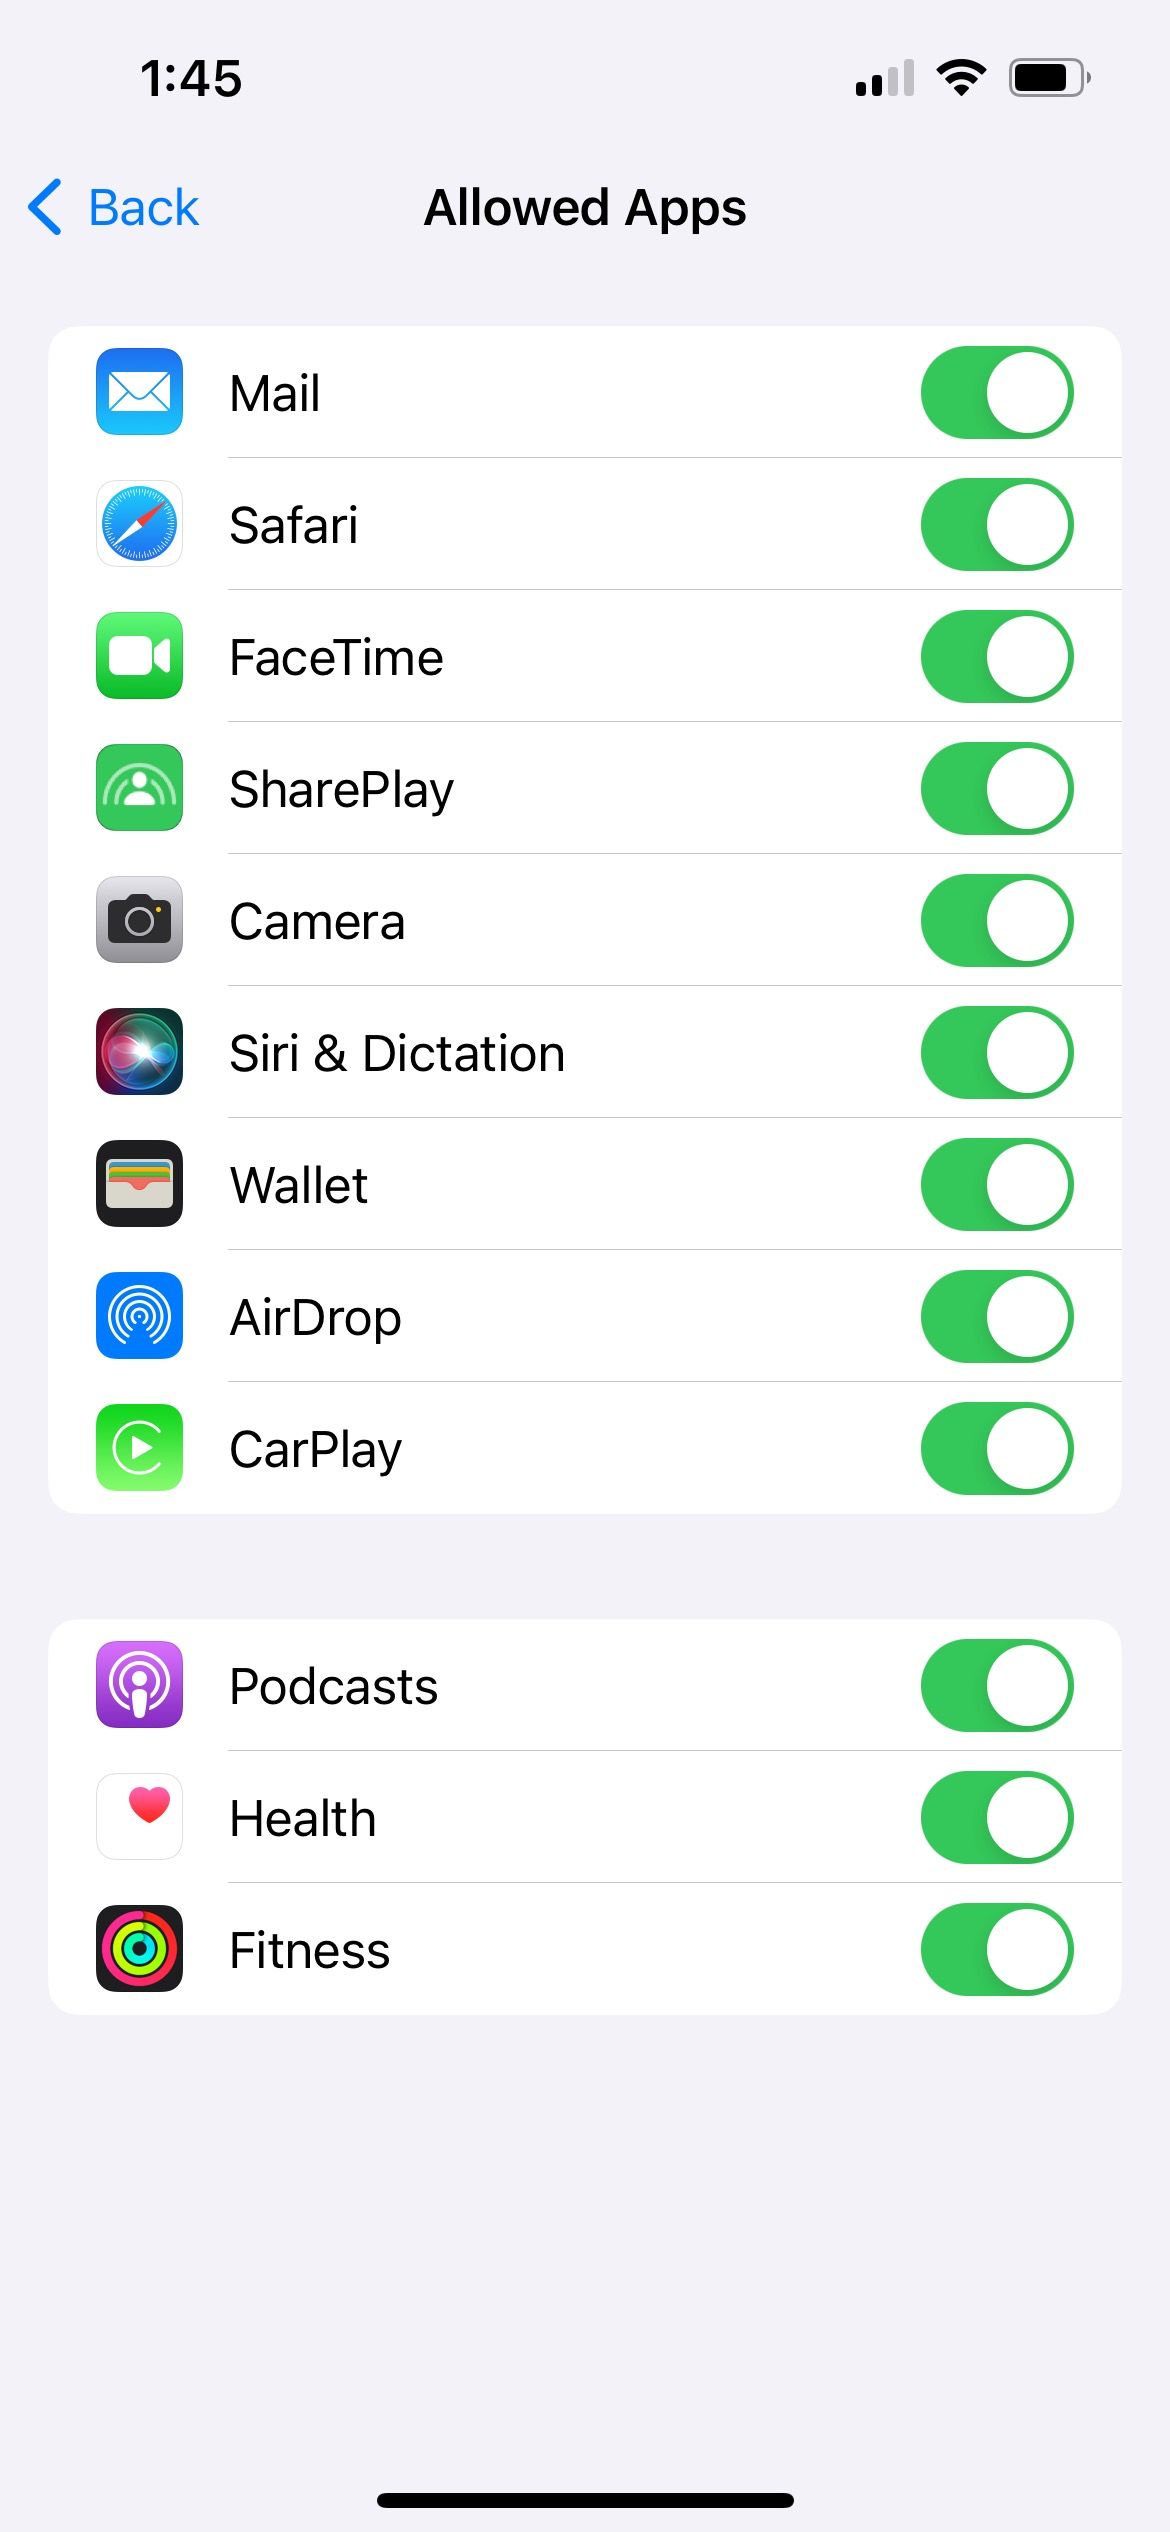 allowed apps in iphone content and privacy restriction settings